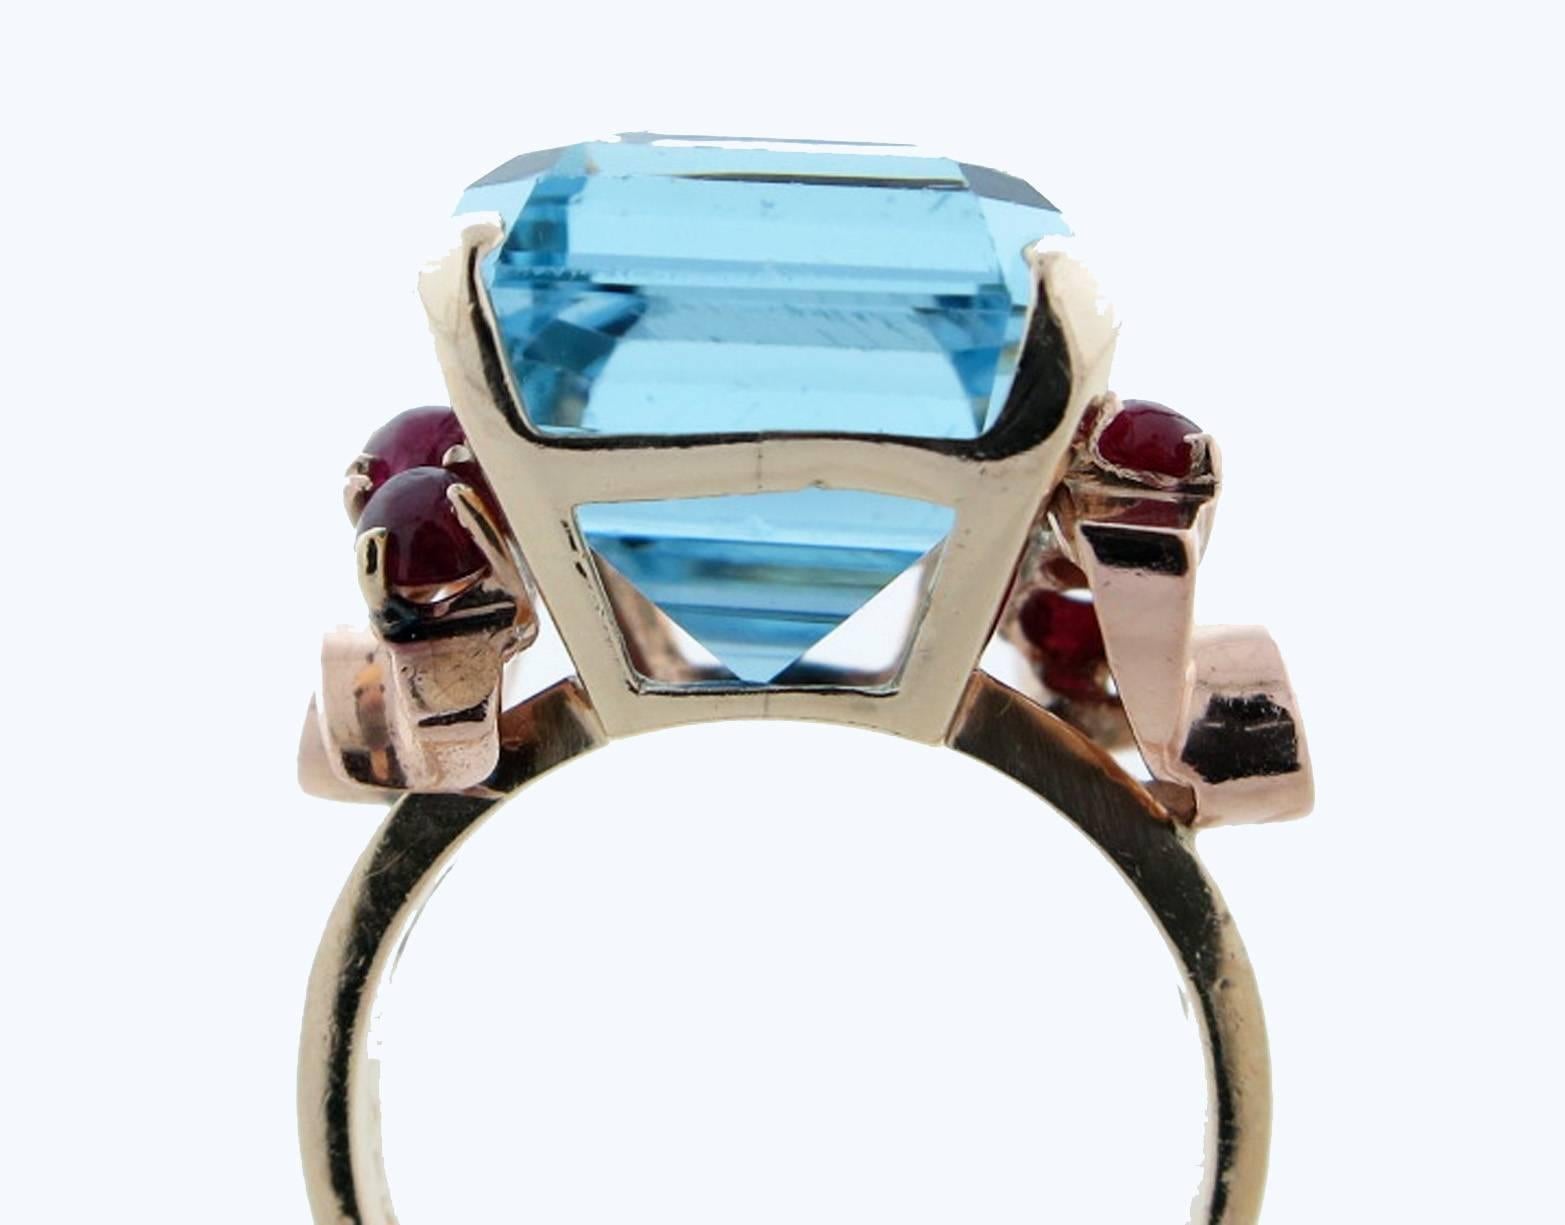 14kt. yellow gold mount aquamarine ring circa 1940. The center is prong set with a faceted natural aquamarine weighing approx 15.0cts. Each side is set with three cabochon natural rubies totaling approx 1.2cts. Size 6 1/2 and can be sized.